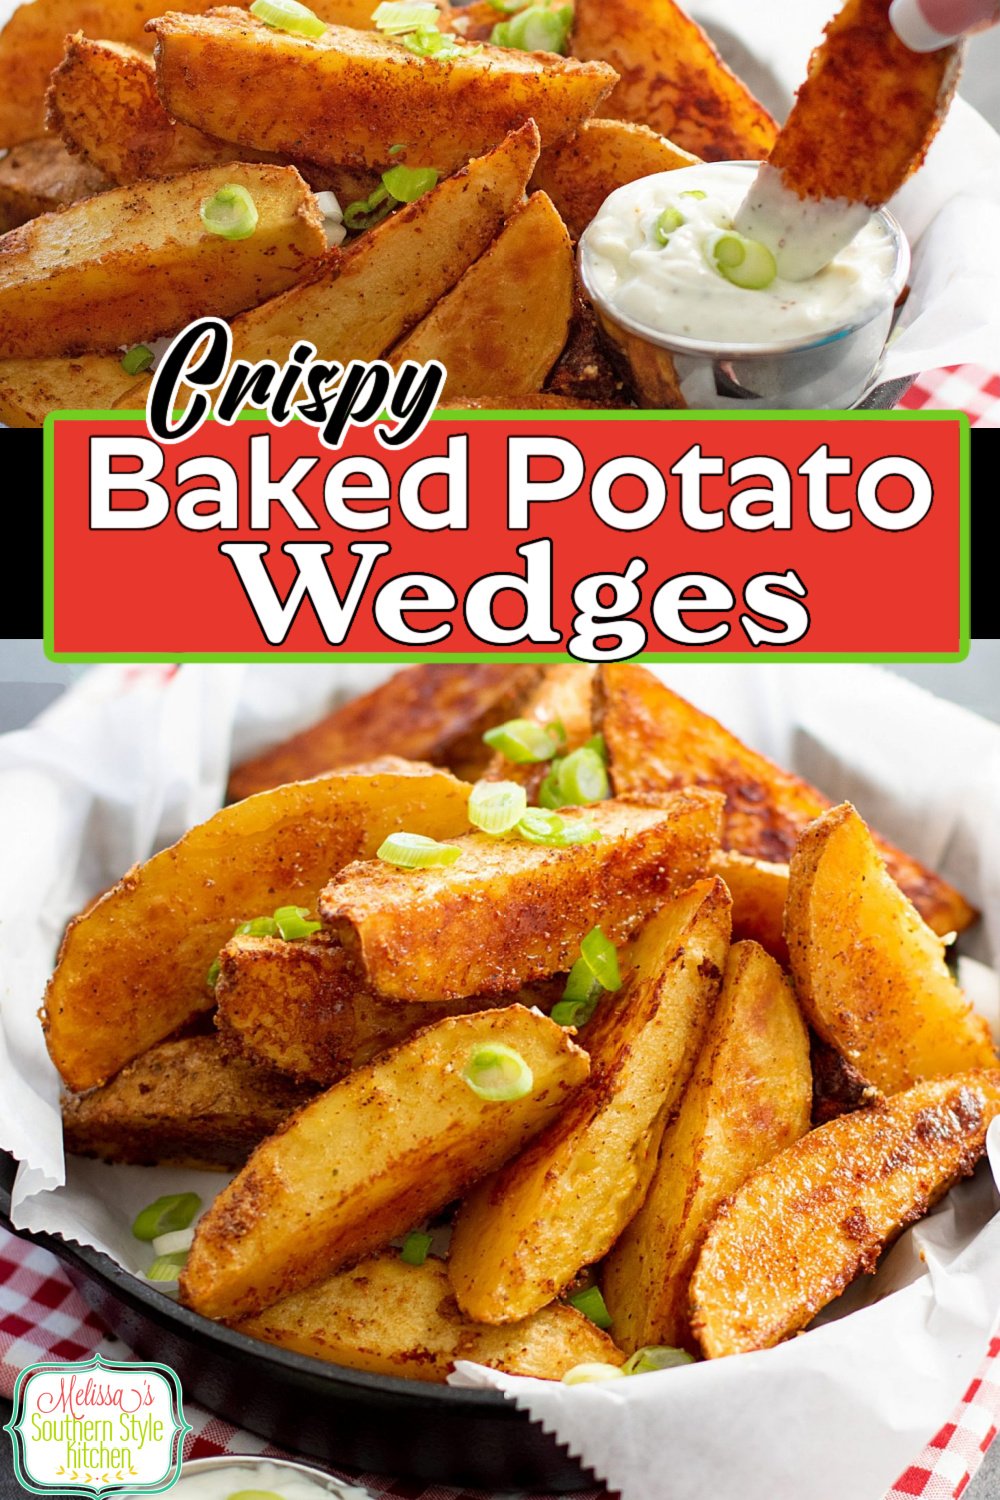 These super easy Crispy Baked Potato Wedges can be served as an appetizer, game day snack or a side dish #crispypotatoes #crispypotatowedges #potatowedges #potatoes #potatorecipes #bakedpotatoes #easysidedishrecipes #easypotatorecipes #southernrecipes via @melissasssk